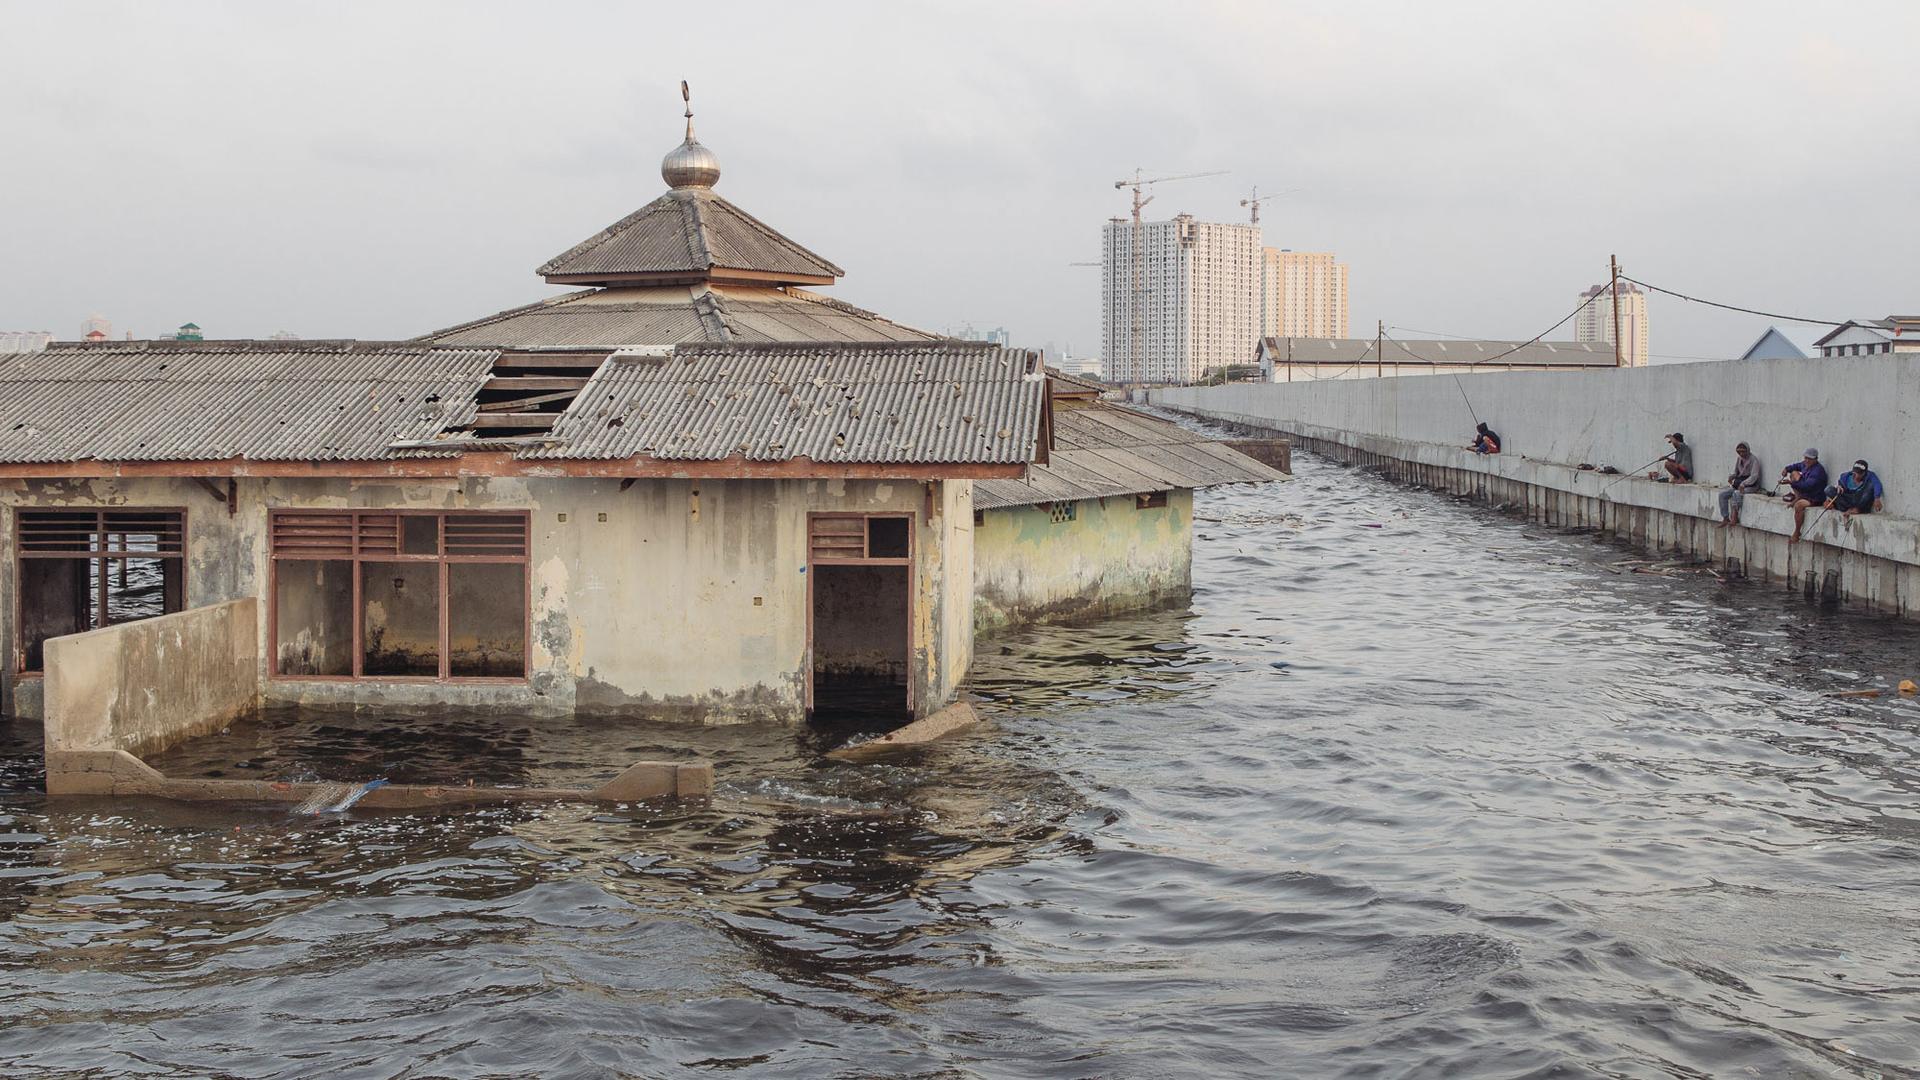 An abandoned mosque outside the seawall in Muara Baru, Jakarta. The city is sinking as a result of massive groundwater extraction, and the problem is especially bad in Muara Barus, which is already below sea level.